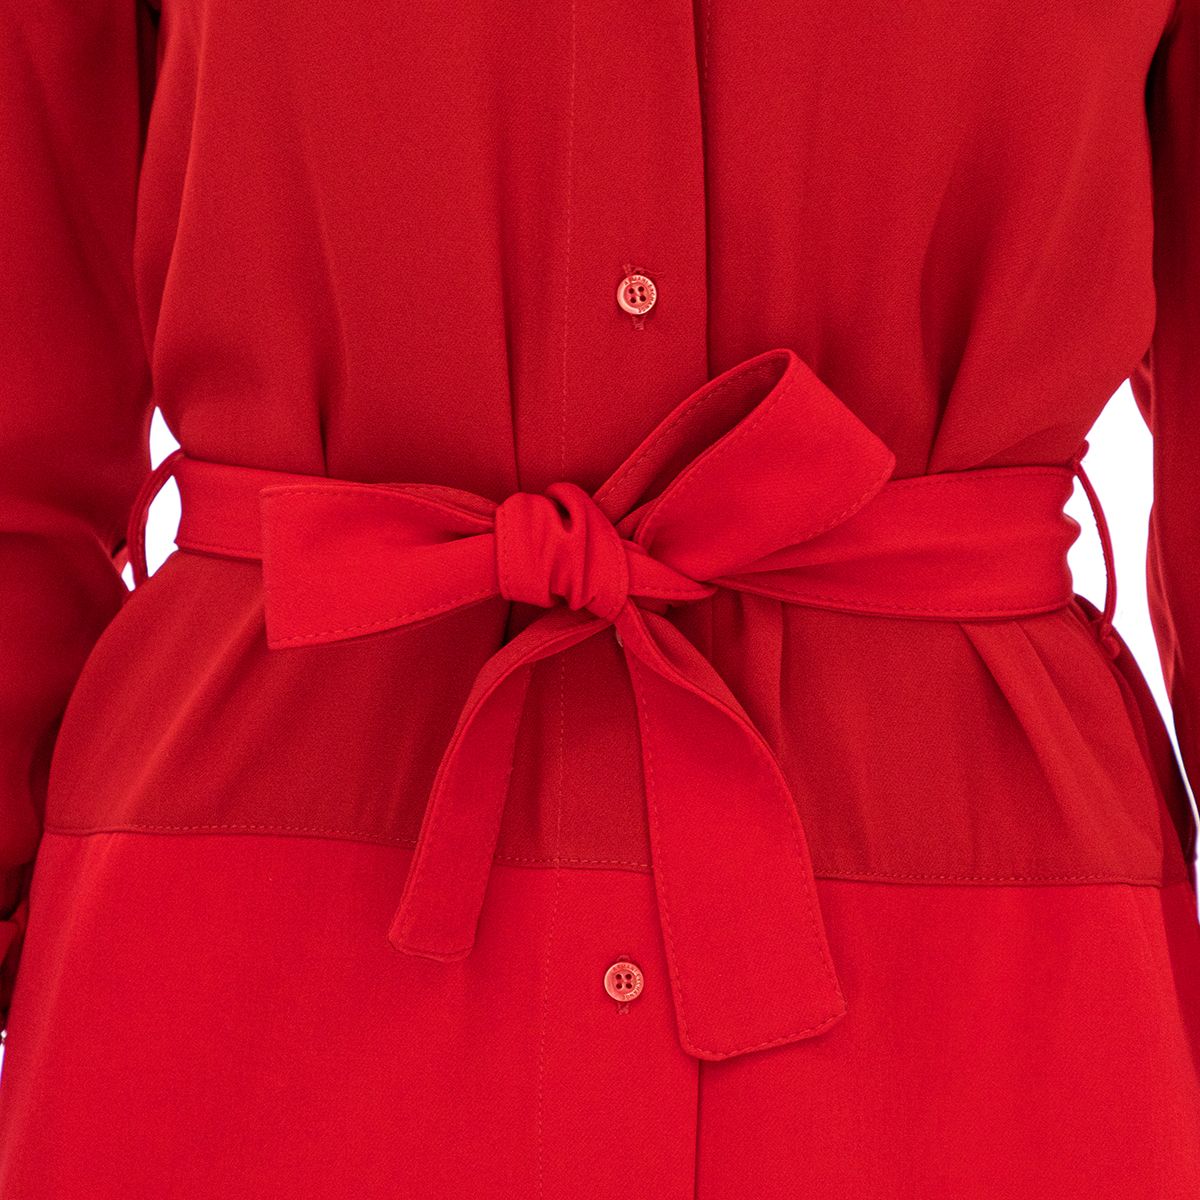 Armani Exchange 6ZYA11YNGUZ-1445-6 Chic and feminine, a red dress like this one will never go out of style.